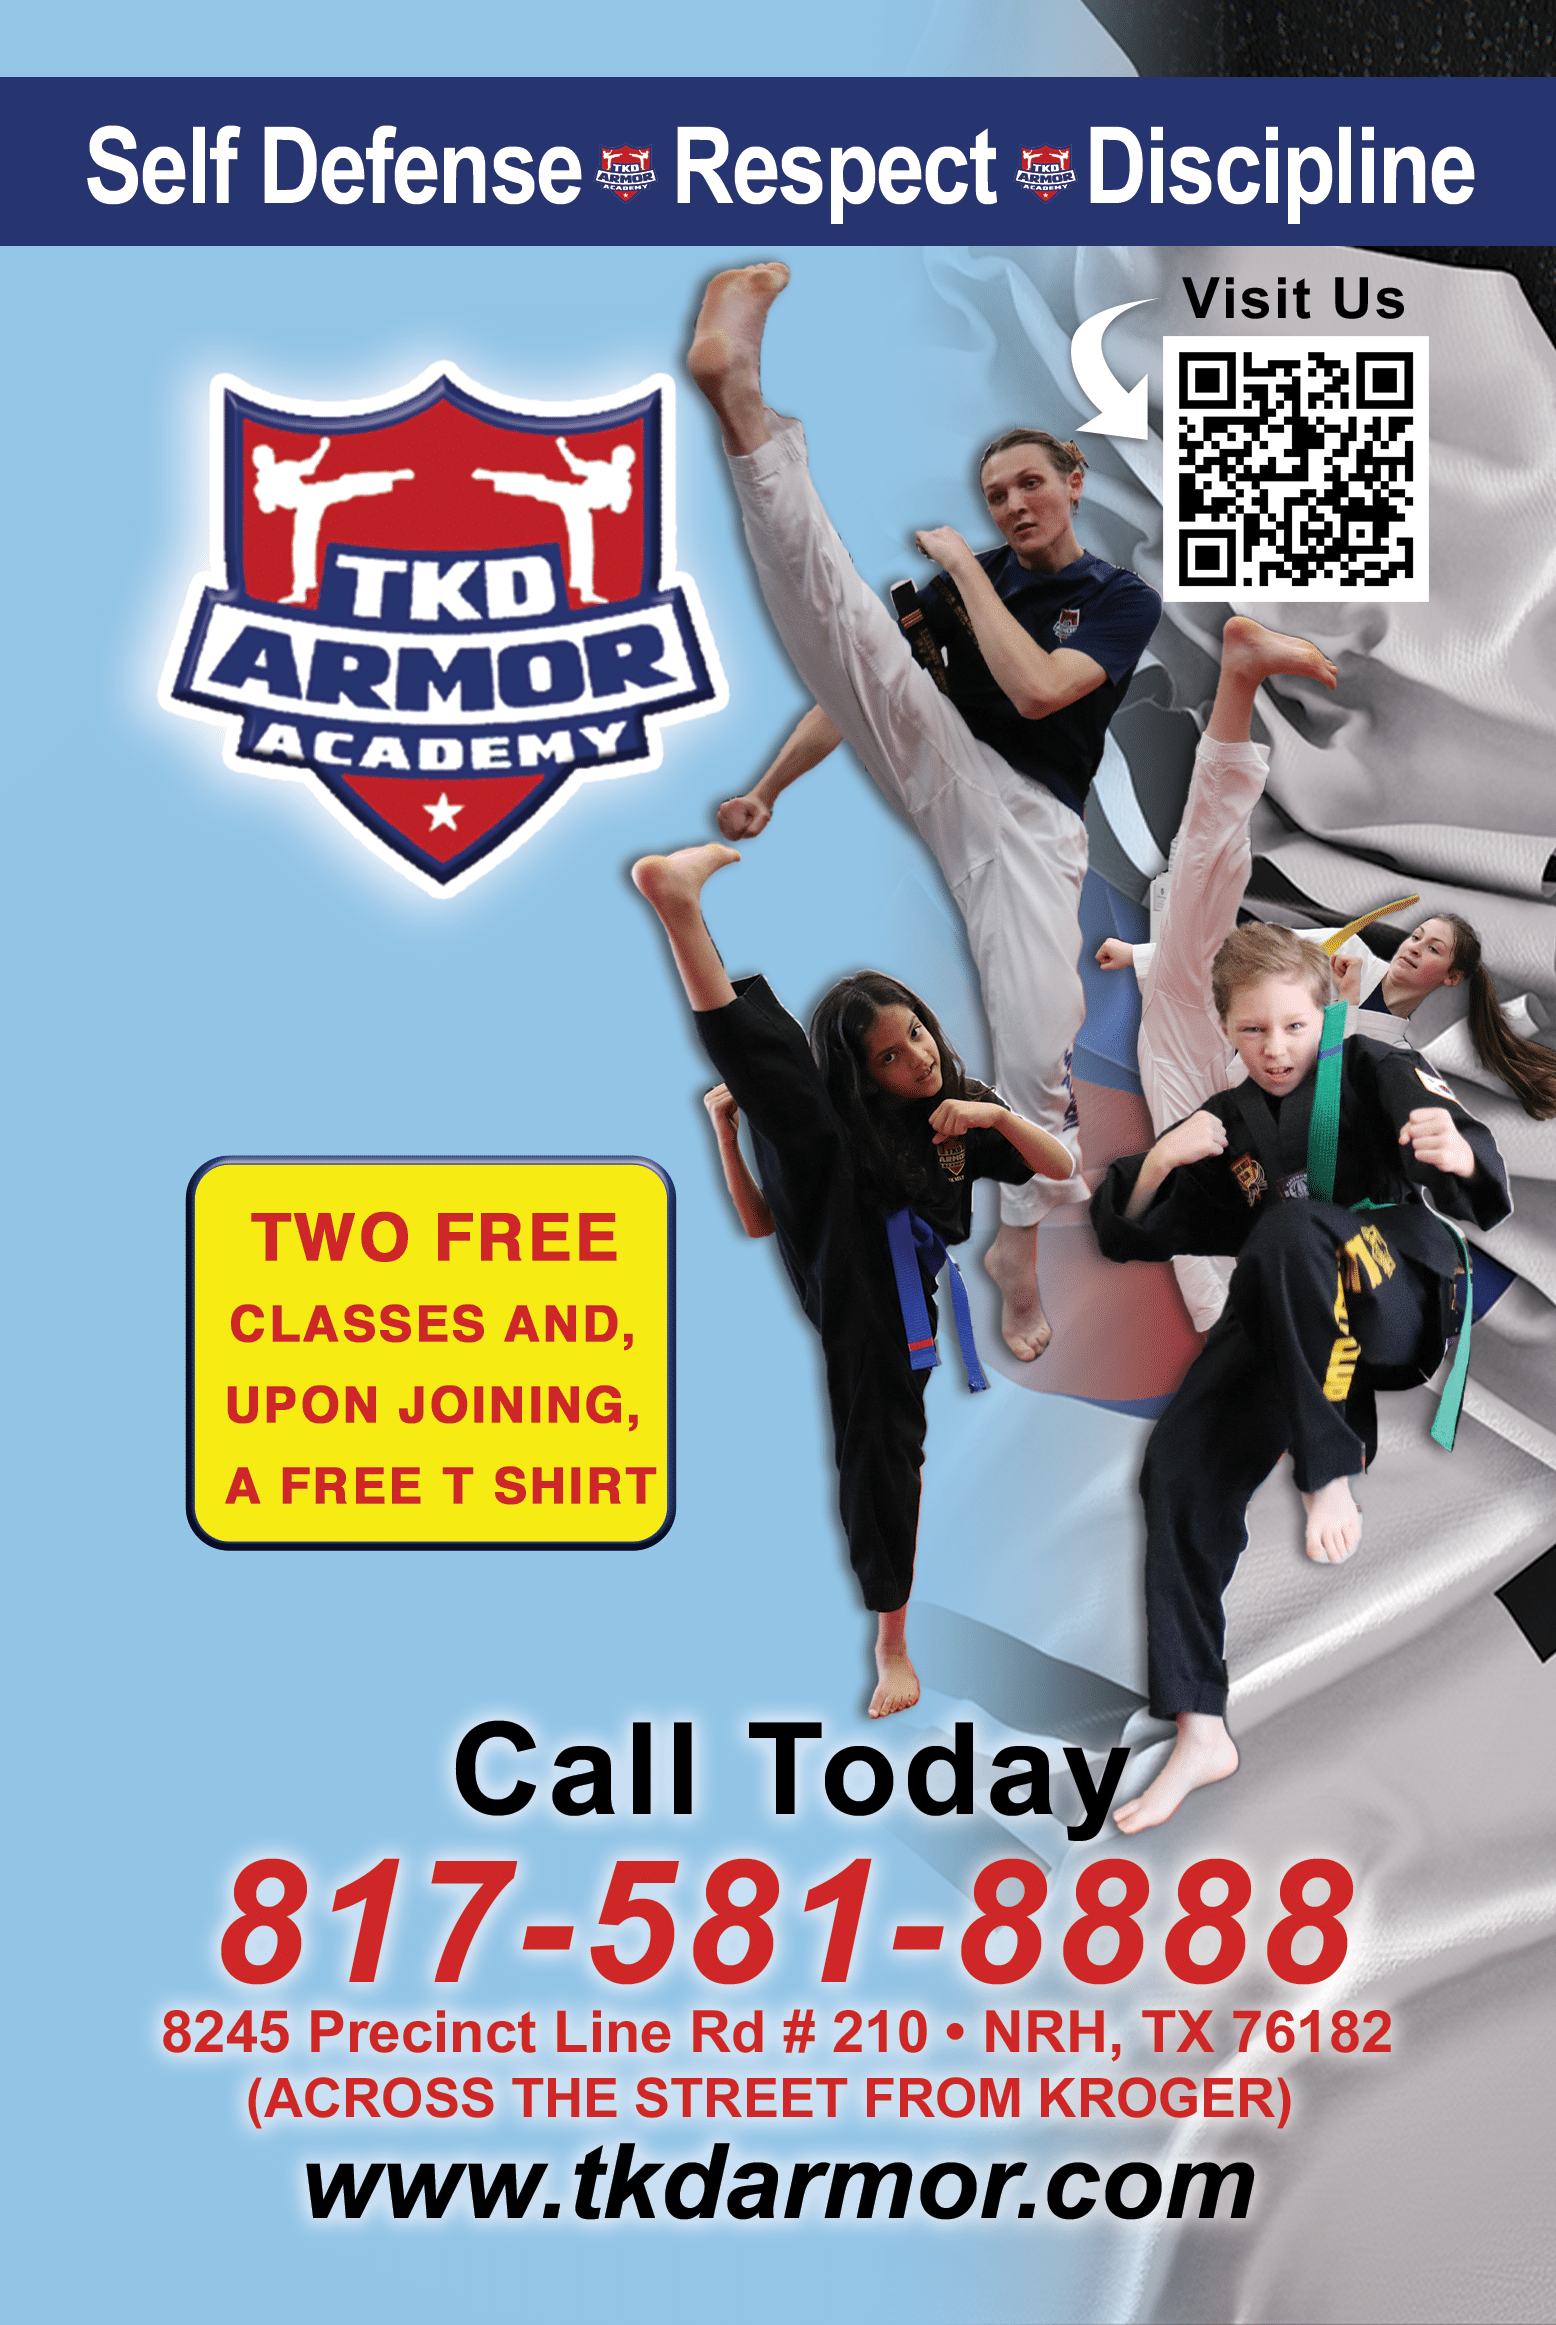 TKD Armor Academy: Two free classes and a free t-shirt. 817-581-8888